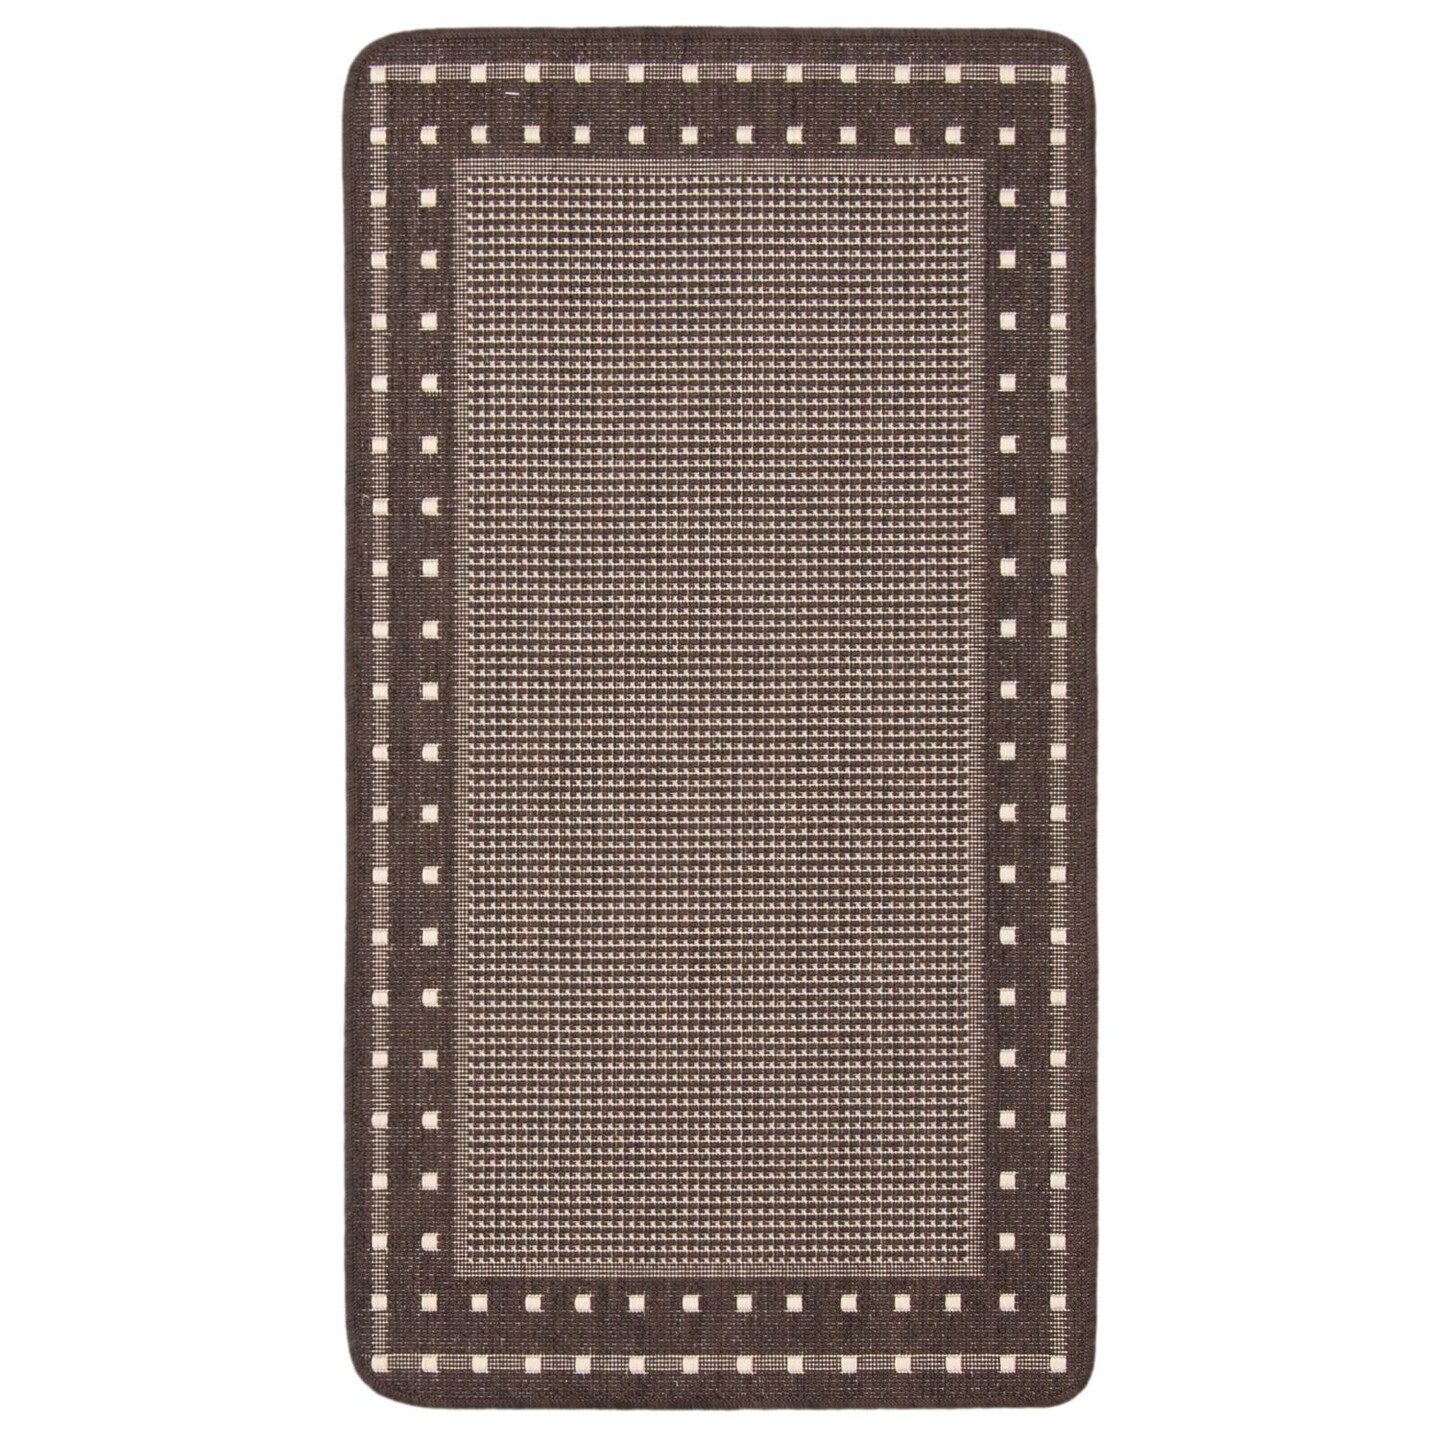 Chaudhary Living 2&#x27; x 4&#x27; Chocolate Brown Bordered Pattern Rectangular Outdoor Area Throw Rug